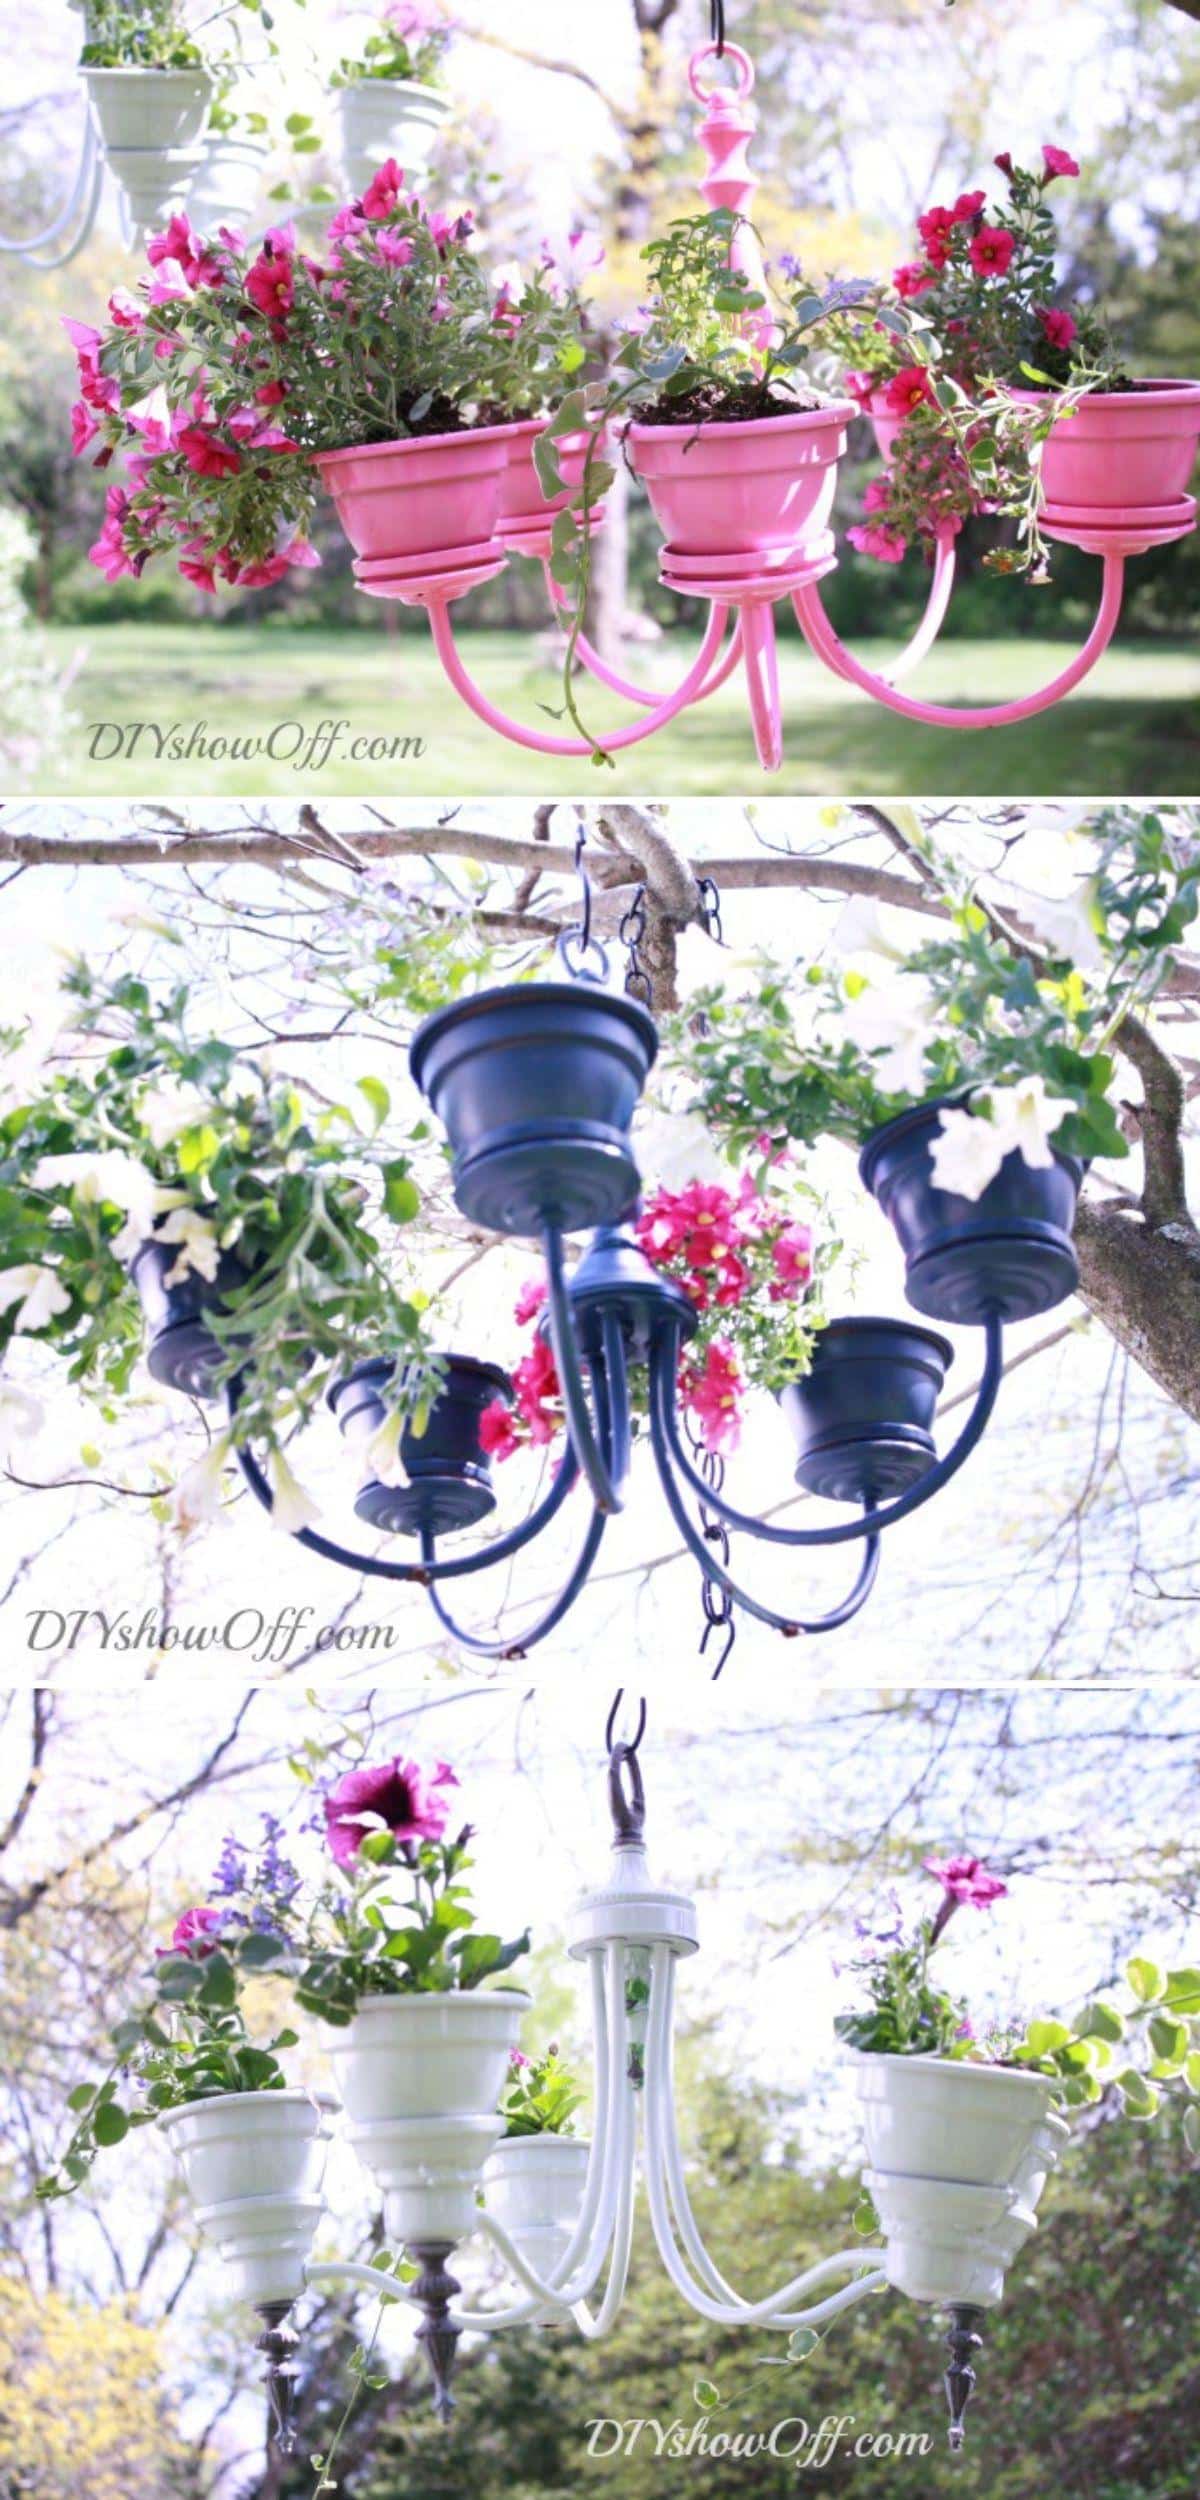 Chandelier Planters collage.